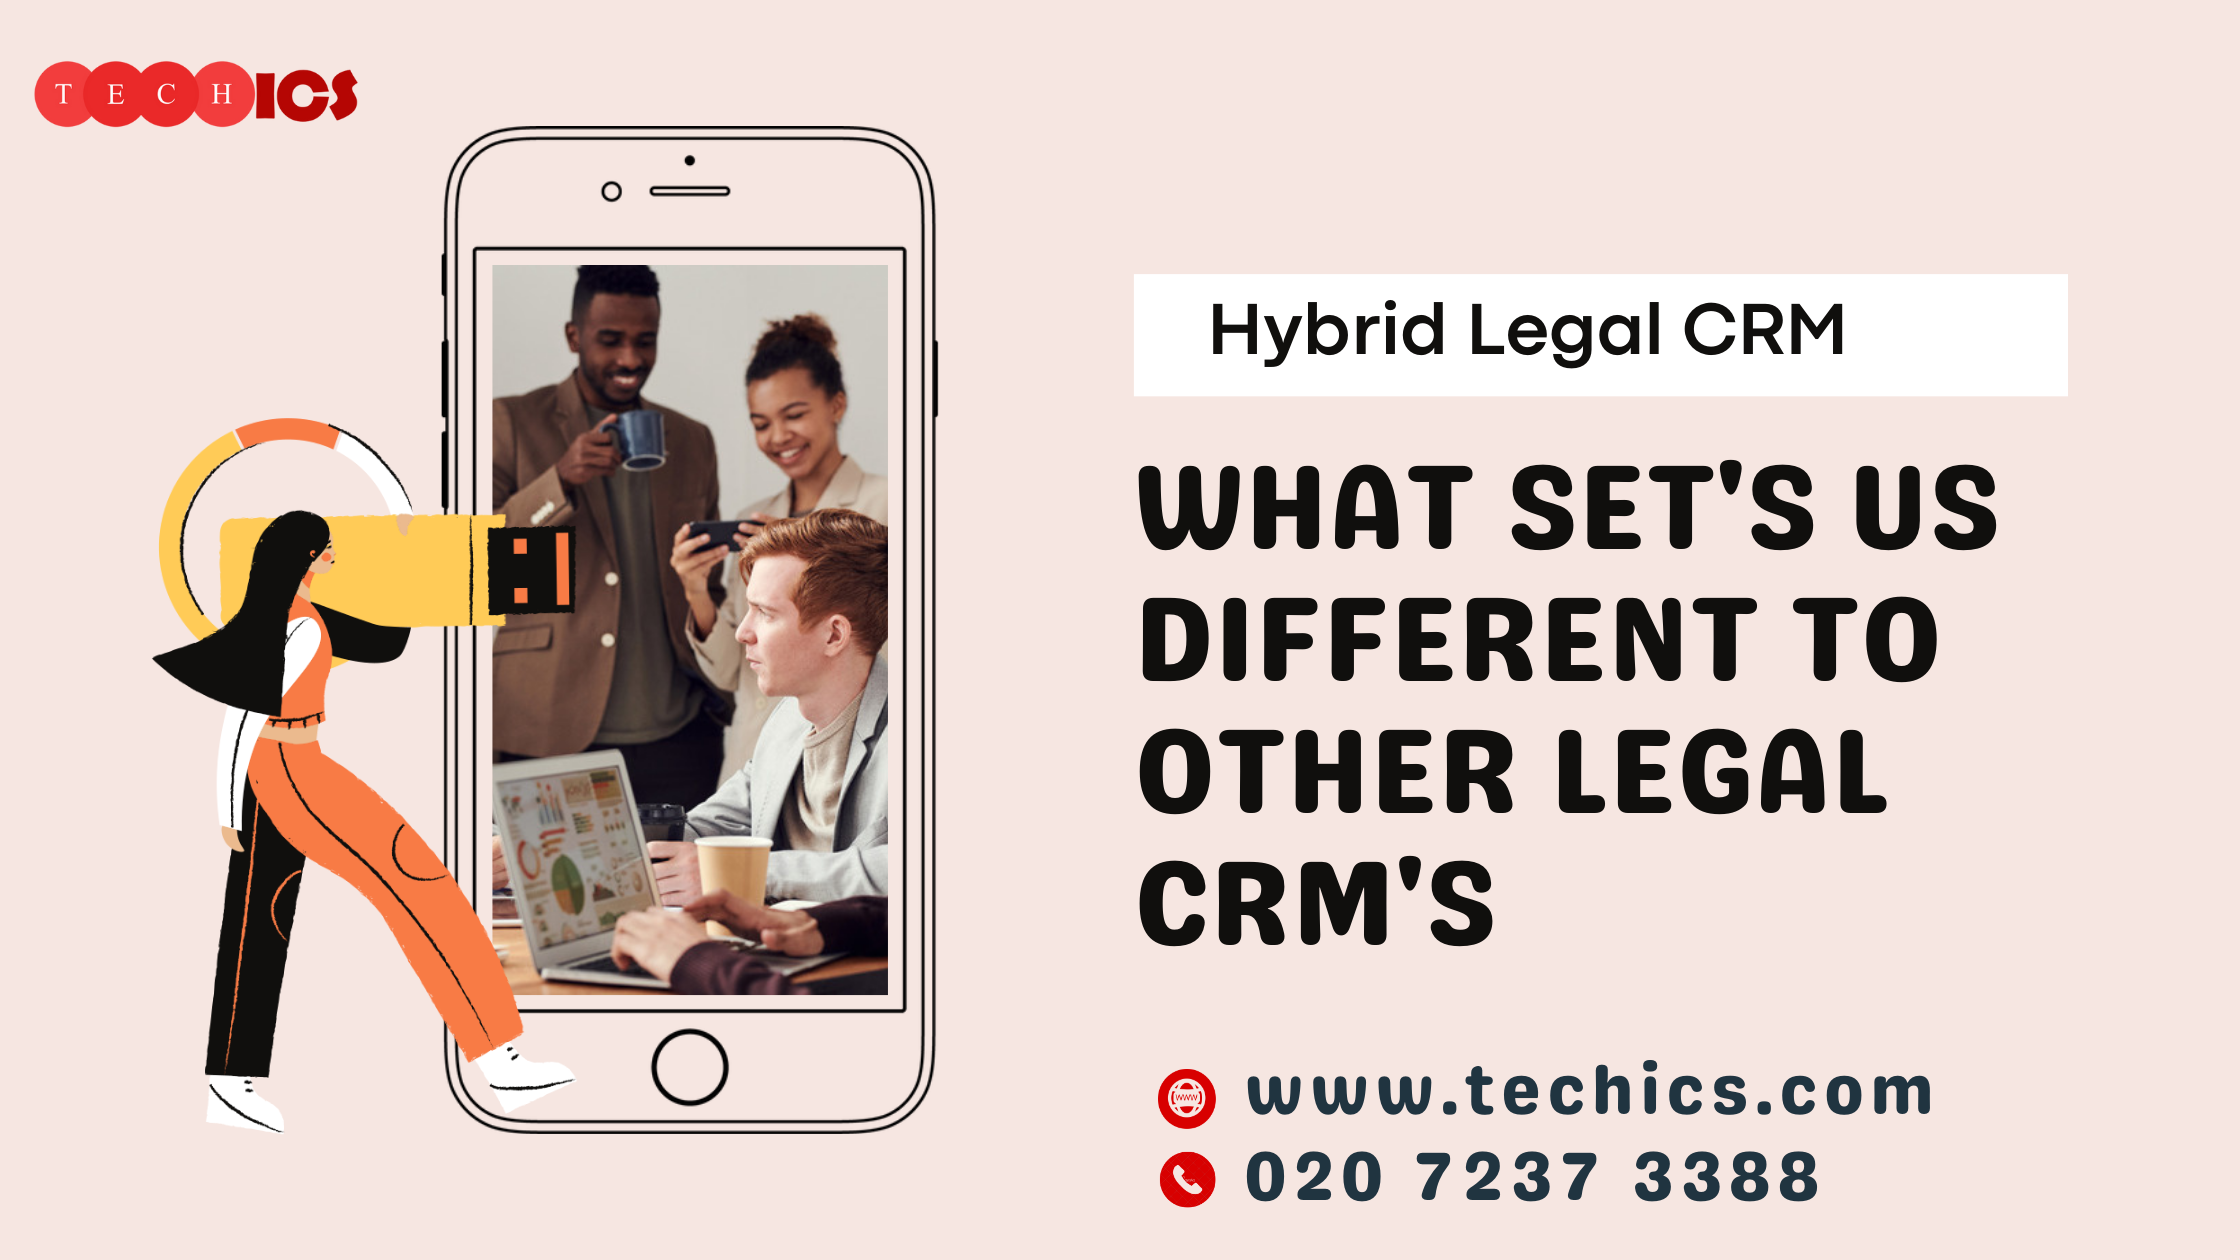 What’s sets us different to other Legal CRM’s